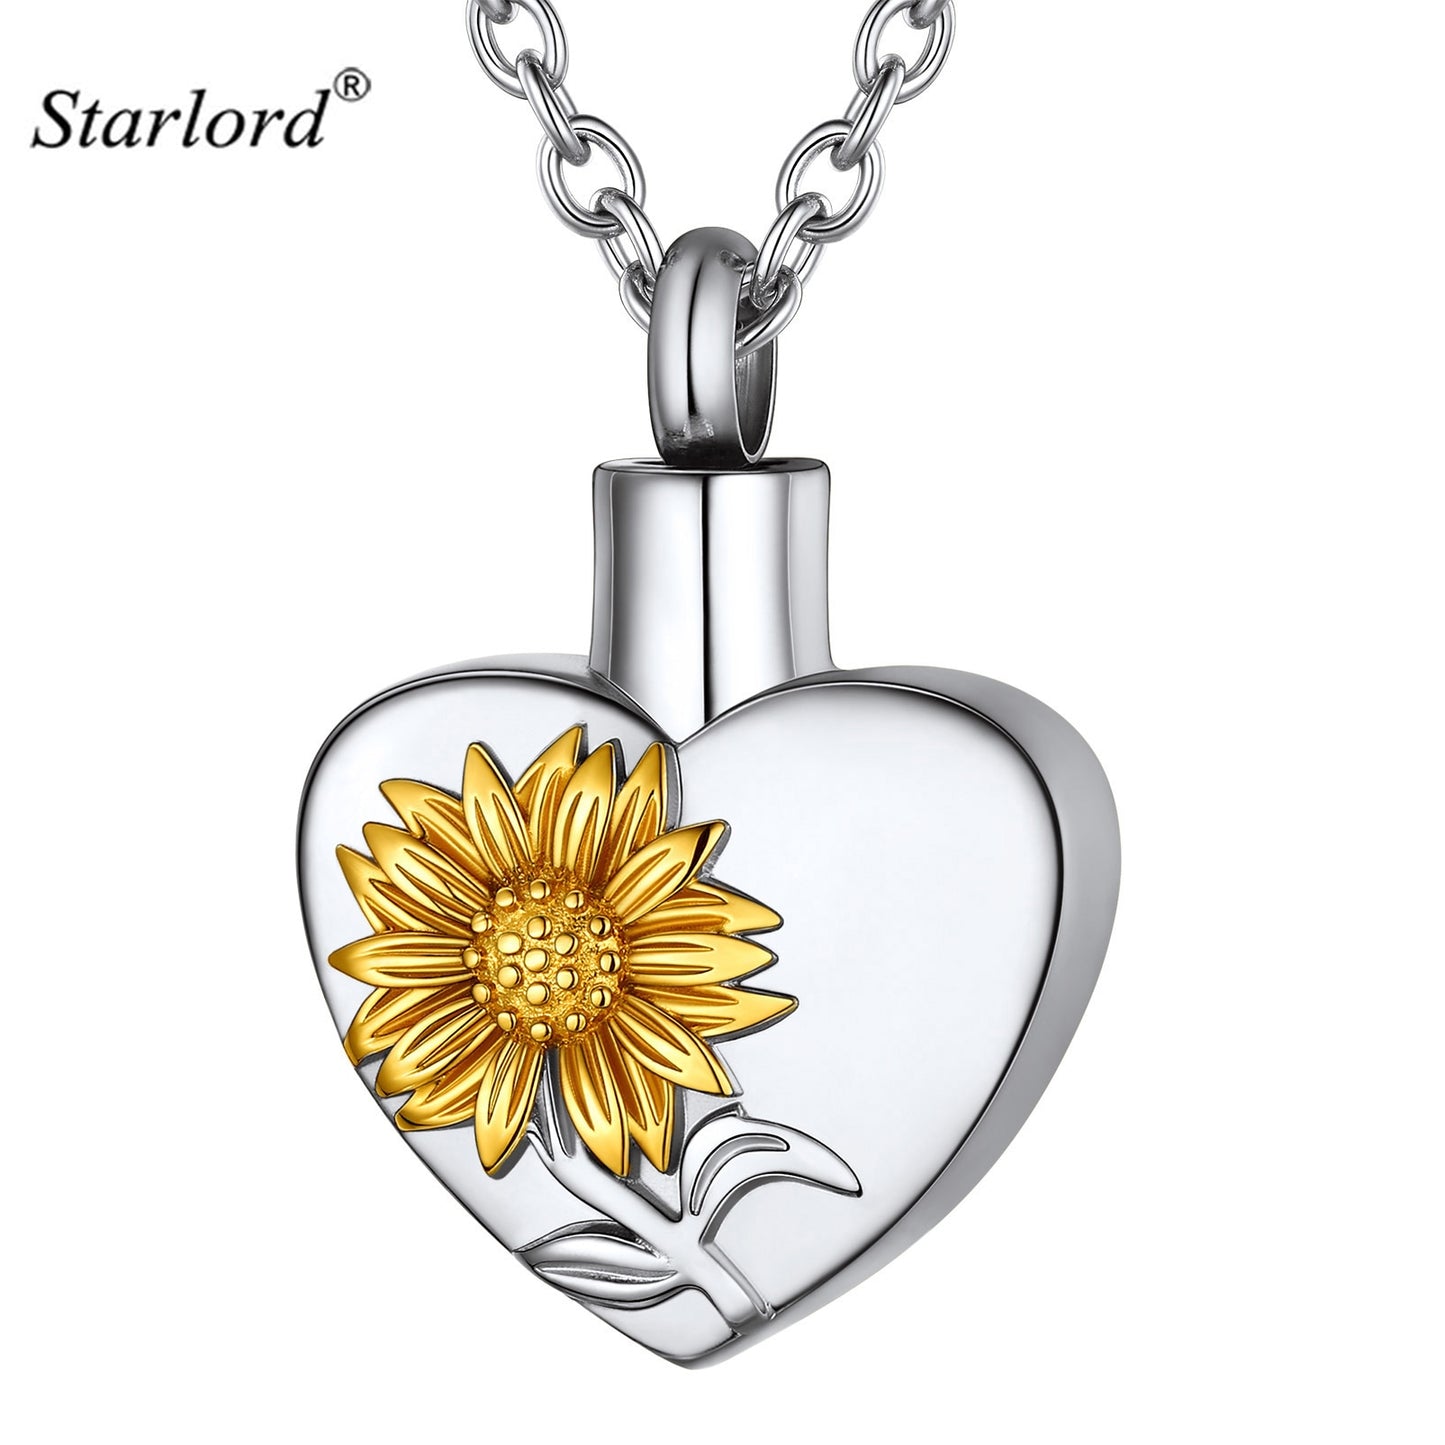 Starlord Stainless Steel Sunflower Ashes Urn Necklaces For Women Memorial Keepsake Cremation Jewelry PSP4883G